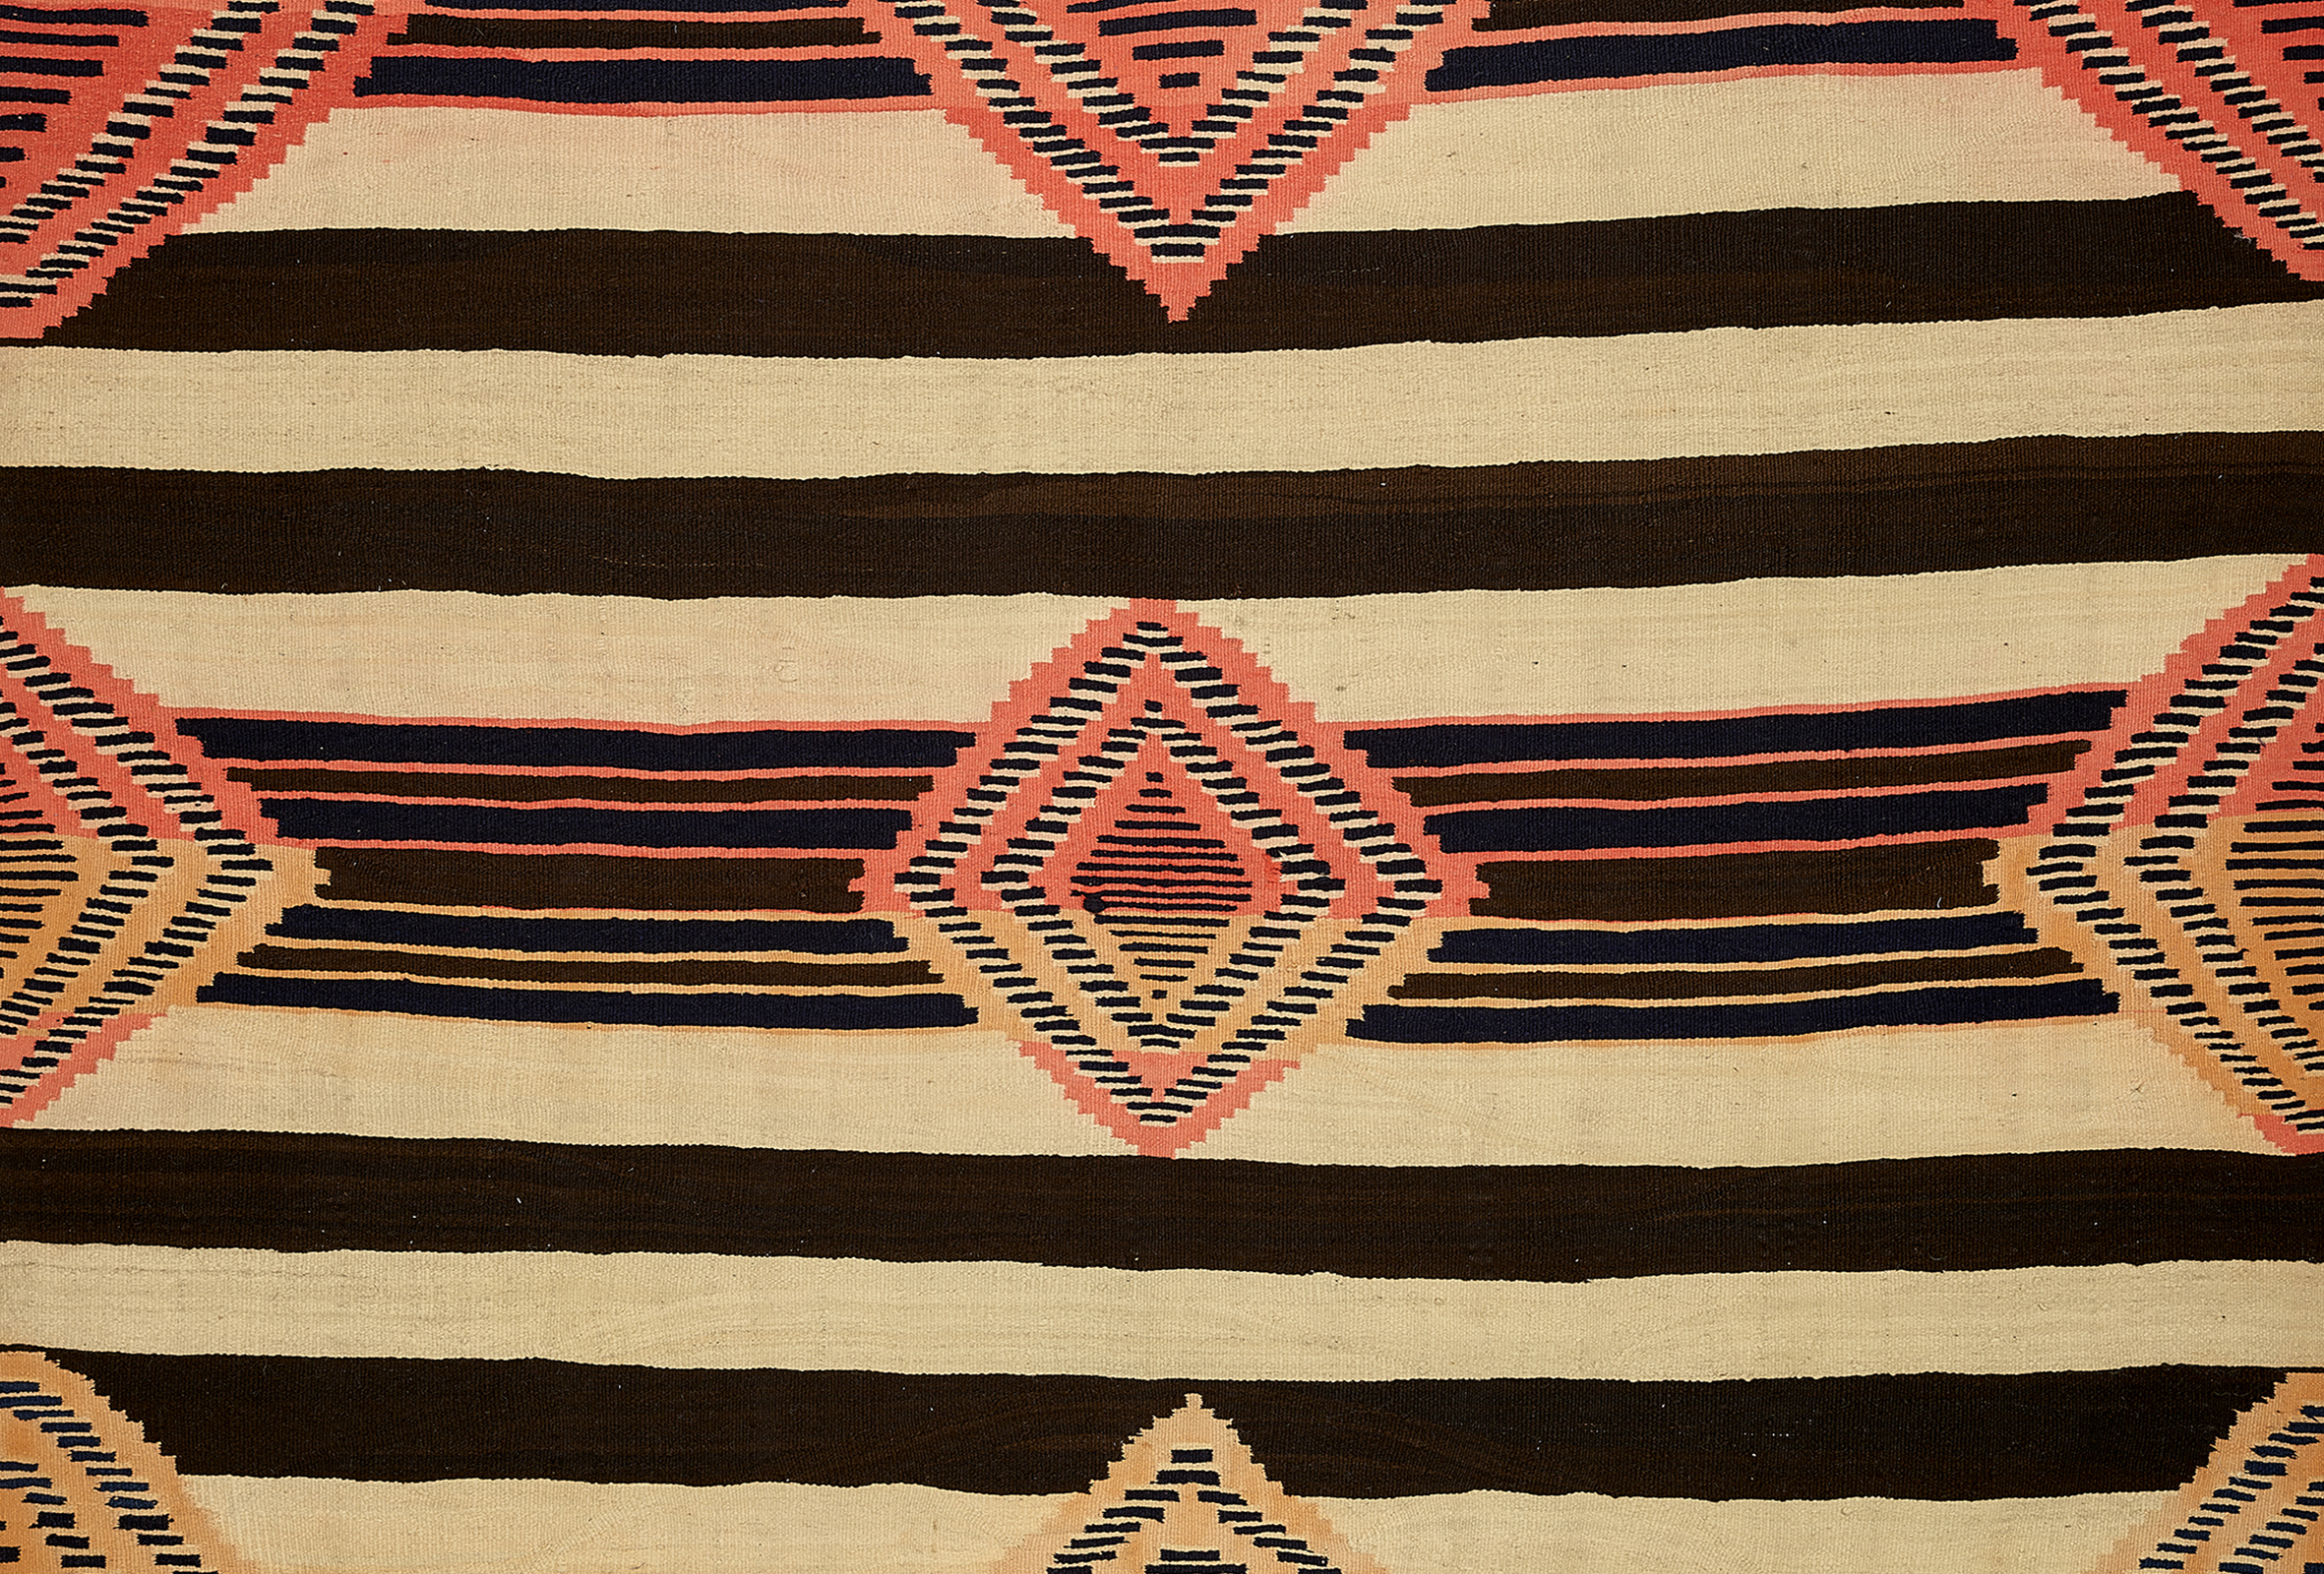 detail of Navajo blanket from RISD Museum collection